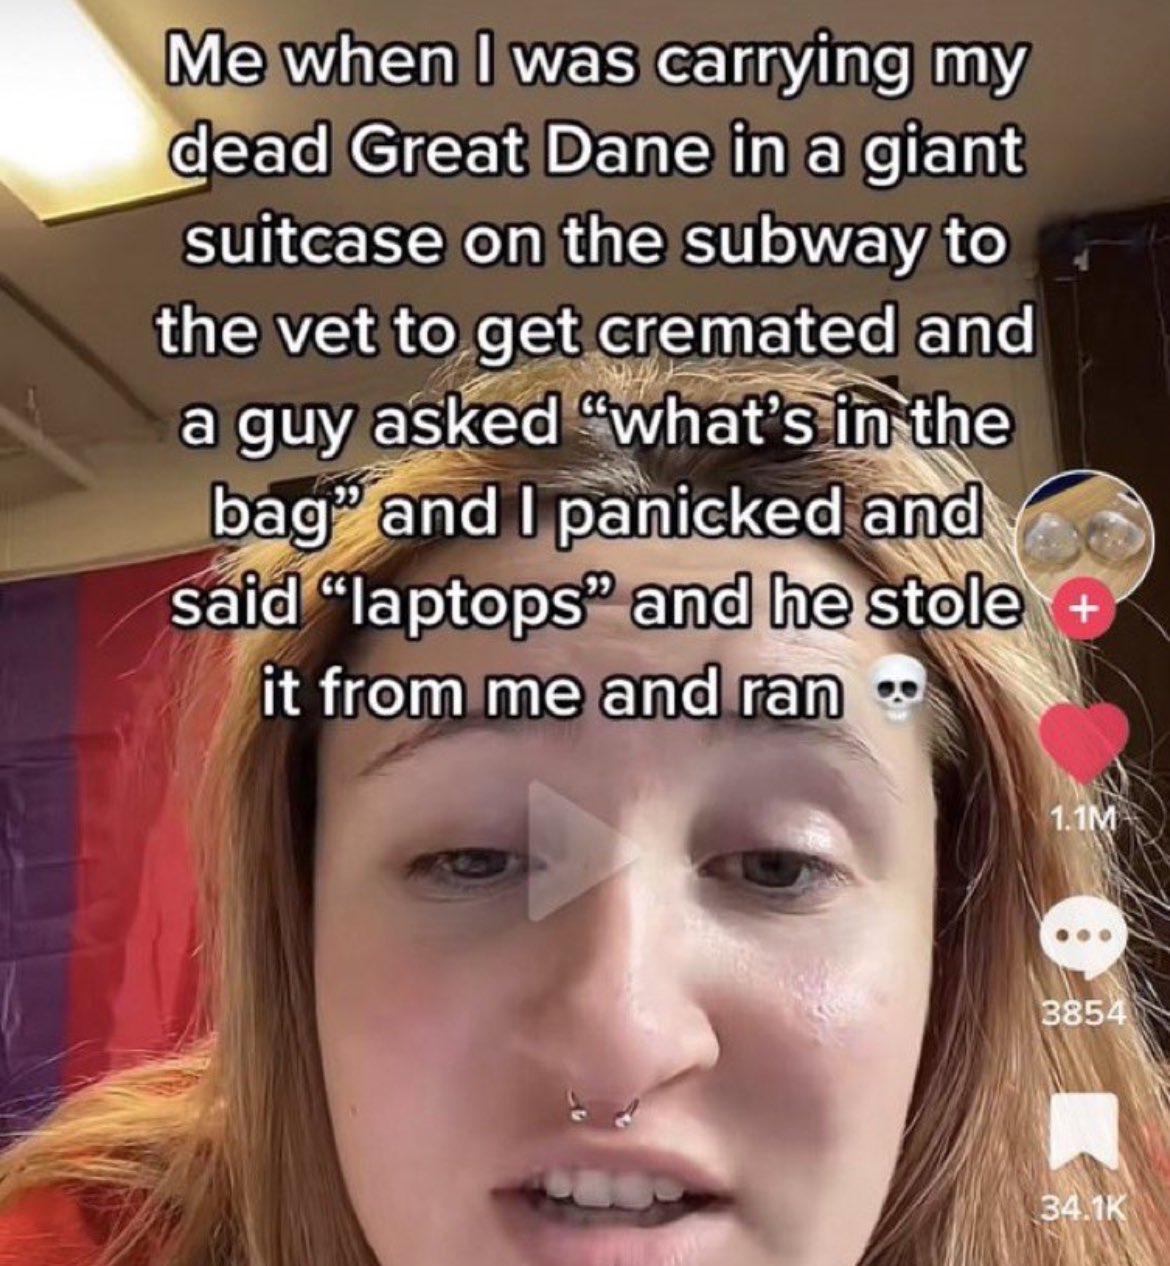 wild tiktok screenshots - lip - Me when I was carrying my dead Great Dane in a giant suitcase on the subway to the vet to get cremated and a guy asked "what's in the bag" and I panicked and said "laptops" and he stole it from me and ran 1.1M 3854